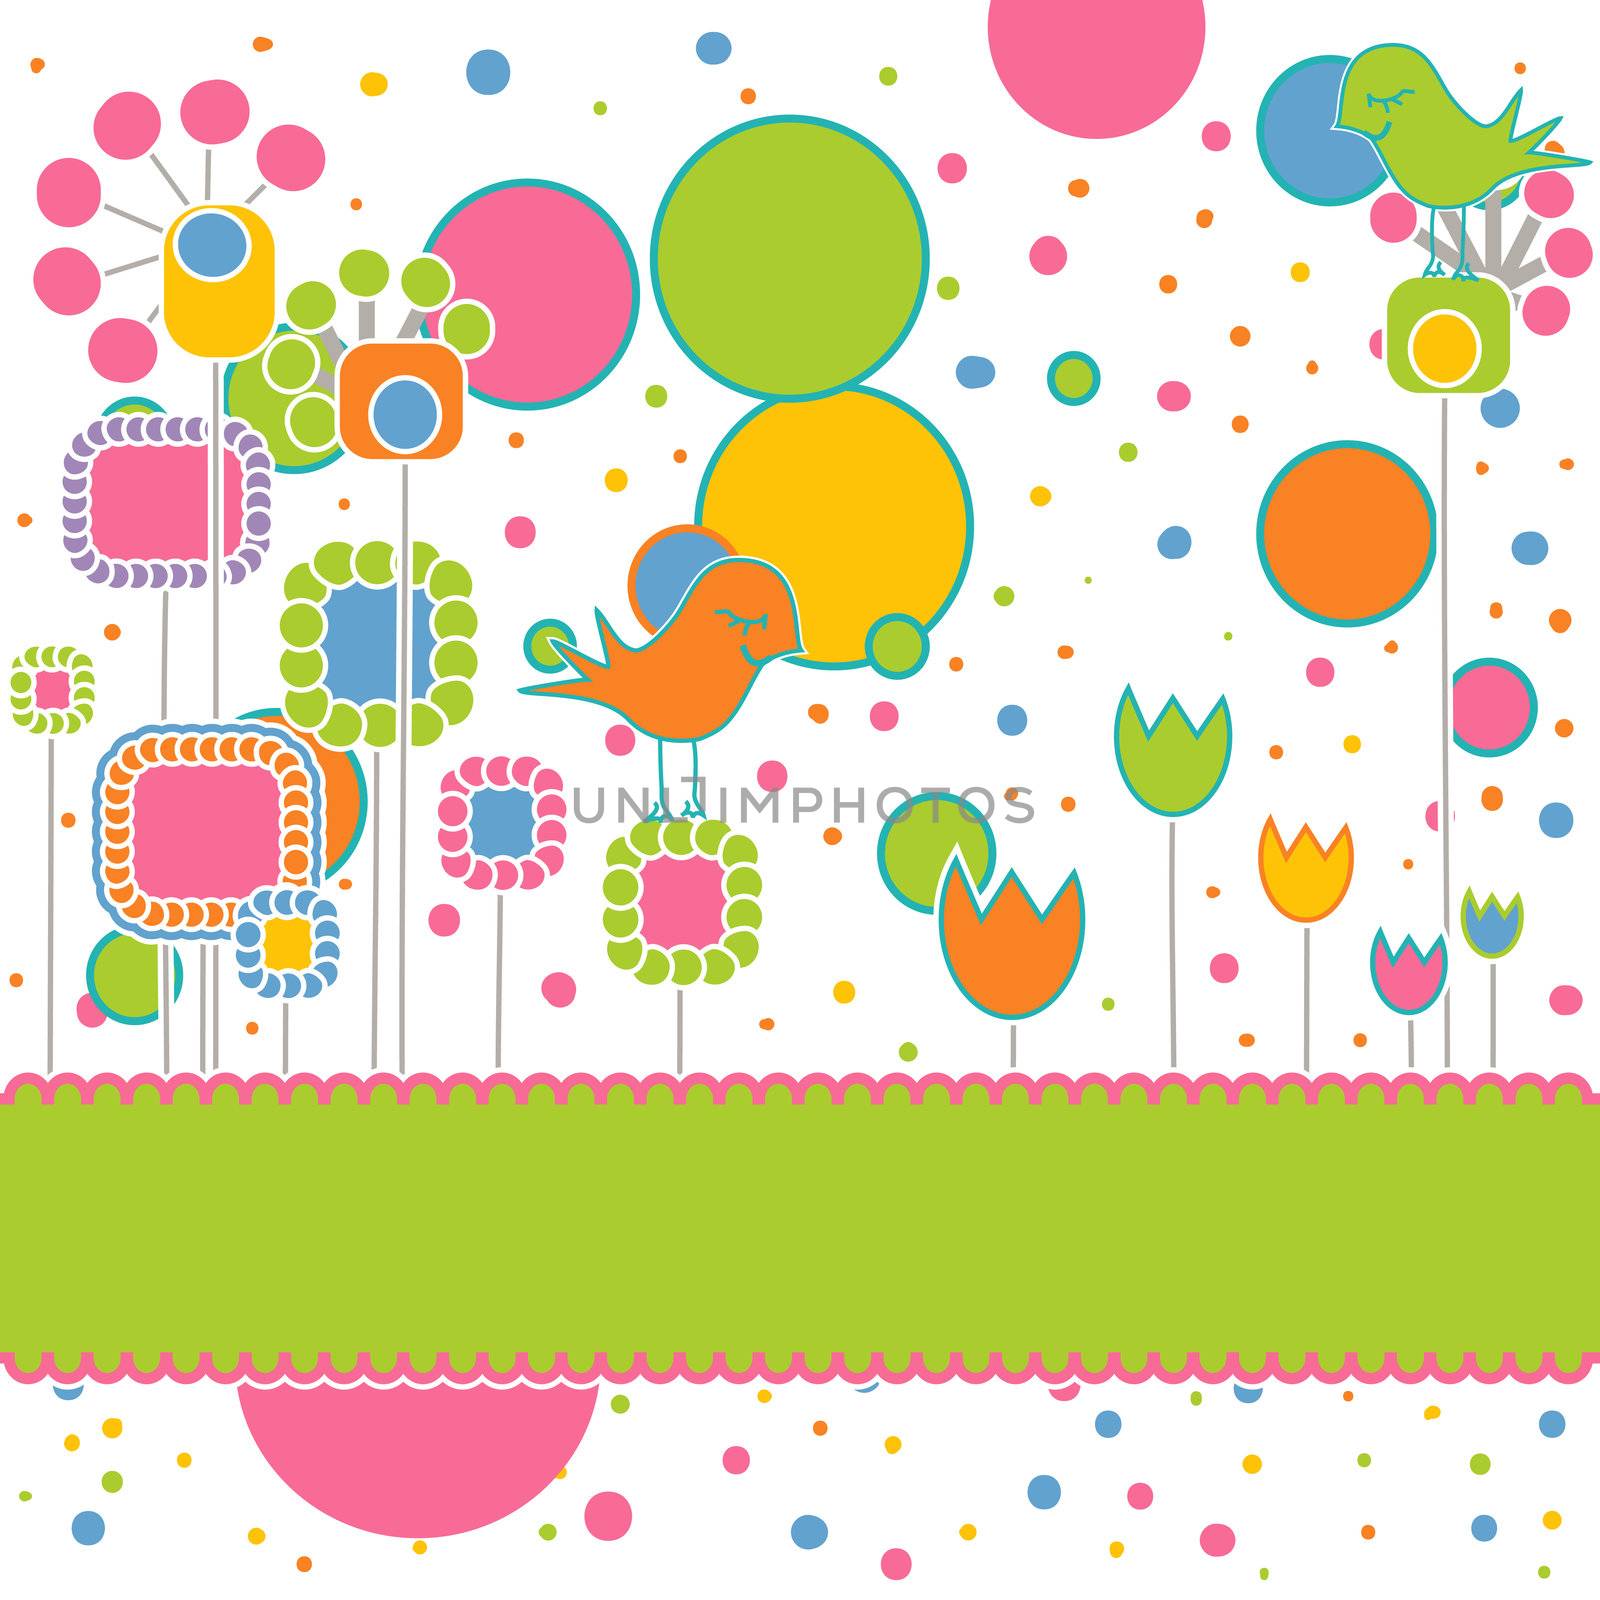 Floral Colorful Card with Two Cute Birds. Put Your Peronalised Text on the Banner.